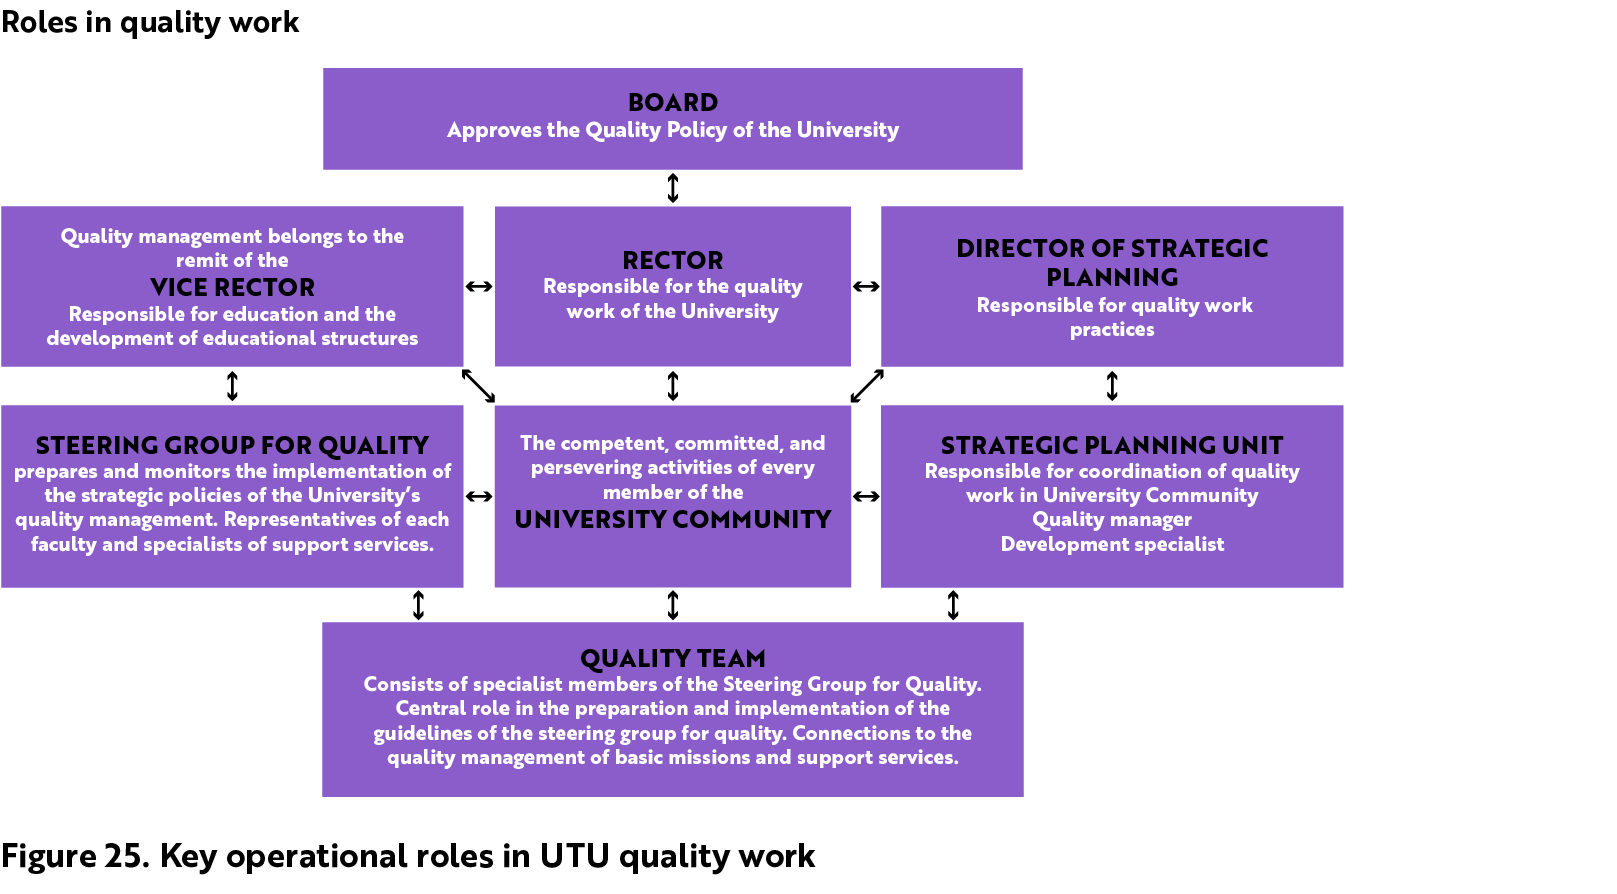 Roles in quality work include the following. The board approves the Quality Policy of the University. The rector is responsible for the quality work of the University. Quality management belongs to the remit of the vice rector responsible for education and the development of educational structures. The director of strategic planning is responsible for quality work practices. The steering group for quality prepares and monitors the implementation of the strategic policies of the University’s quality management. The steering group for quality includes representatives of each faculty and specialists of support services. The competent, committed, and persevering activities of every member of the university community. The strategic planning unit is responsible for coordination of quality work in the University Community. Quality manager and Development specialist are part of the strategic planning unit. The quality team consists of specialist members of the Steering Group for Quality. The quality team has a central role in the preparation and implementation of the guidelines of the steering group for quality. It has connections to the quality management of basic missions and support services.